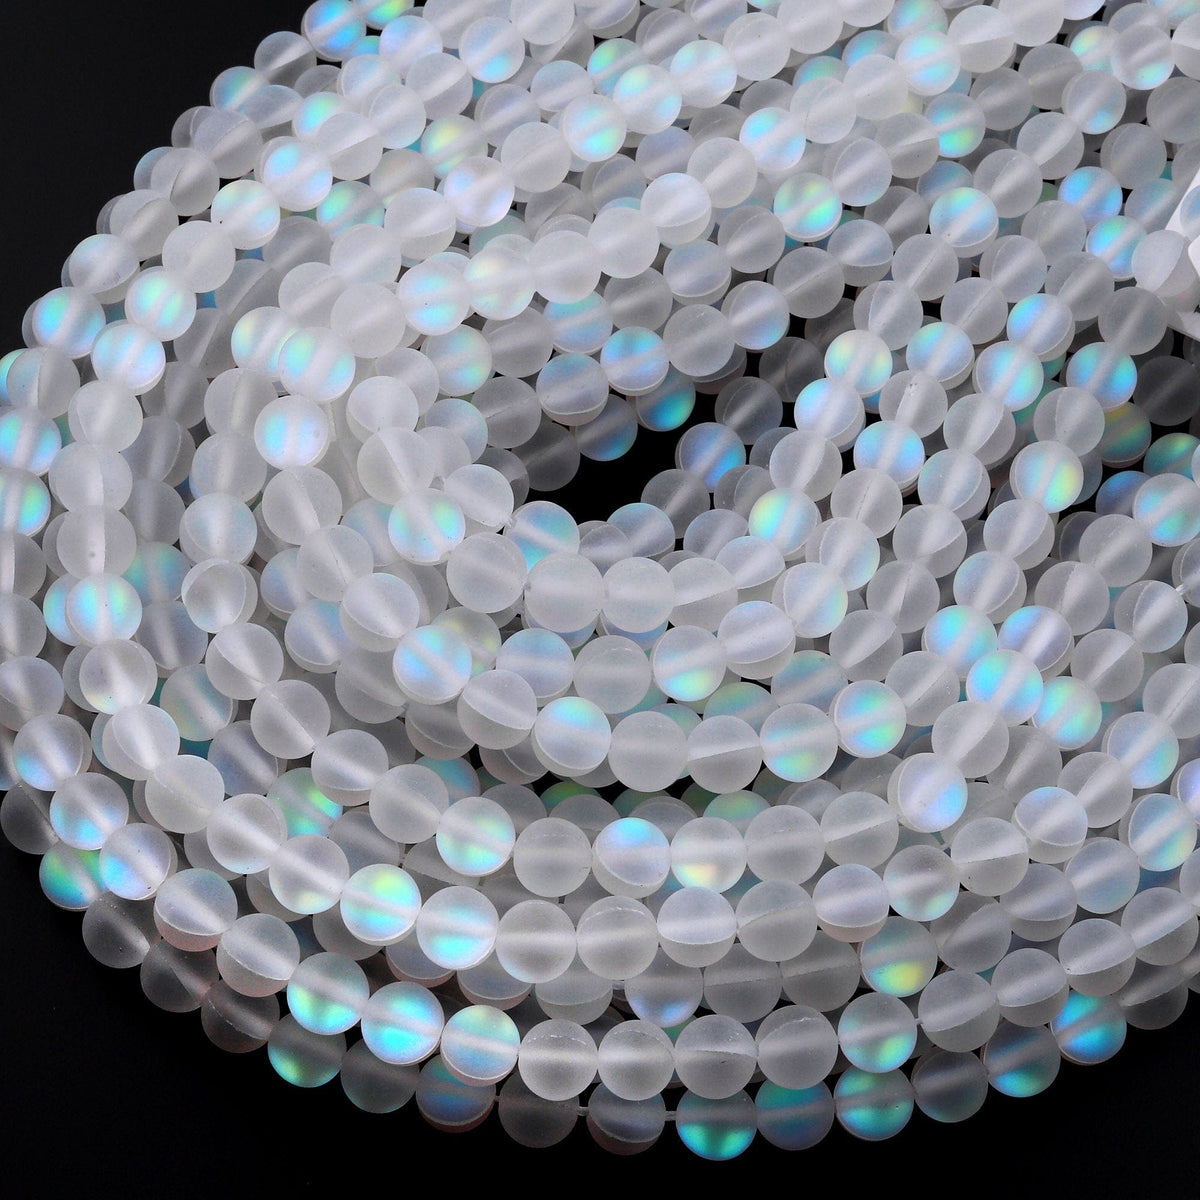 Mermaid Beads (Synthetic Moonstone) 6mm matte clear (Approx. 32  beads/strand)